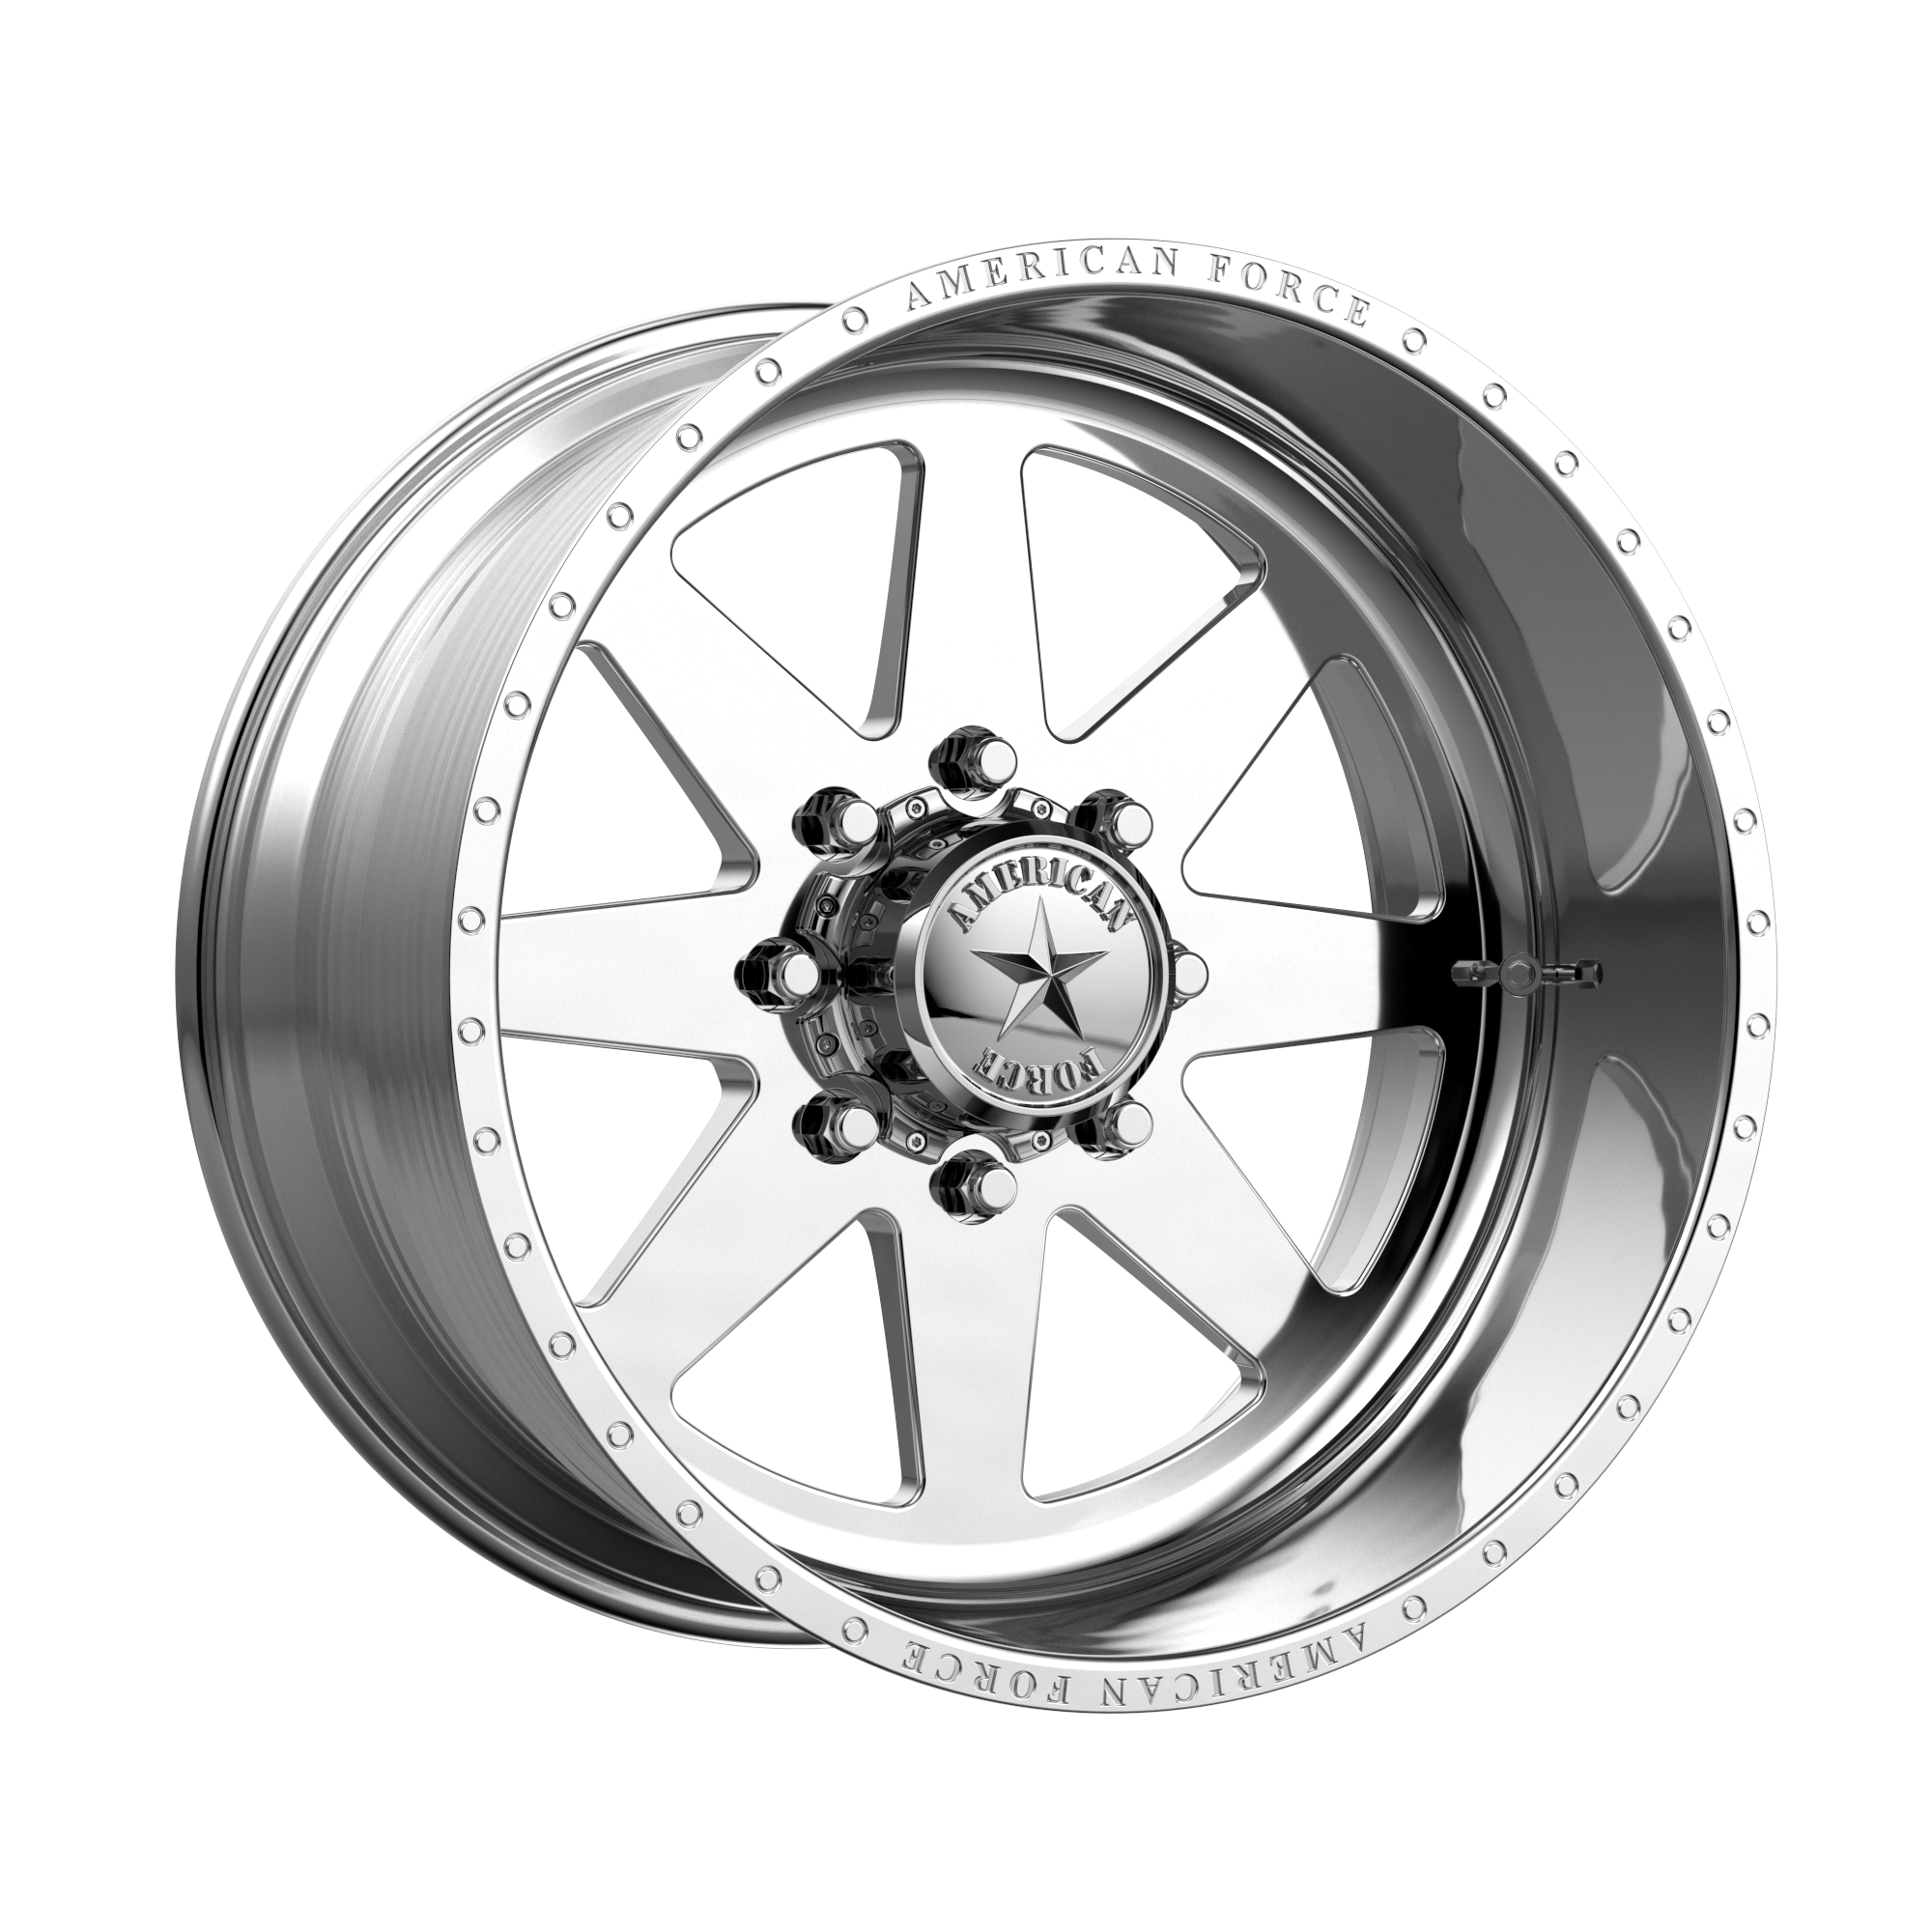 INDEPENDENCE SS 26x12 6x139.70 POLISHED (-40 mm) - Tires and Engine Performance